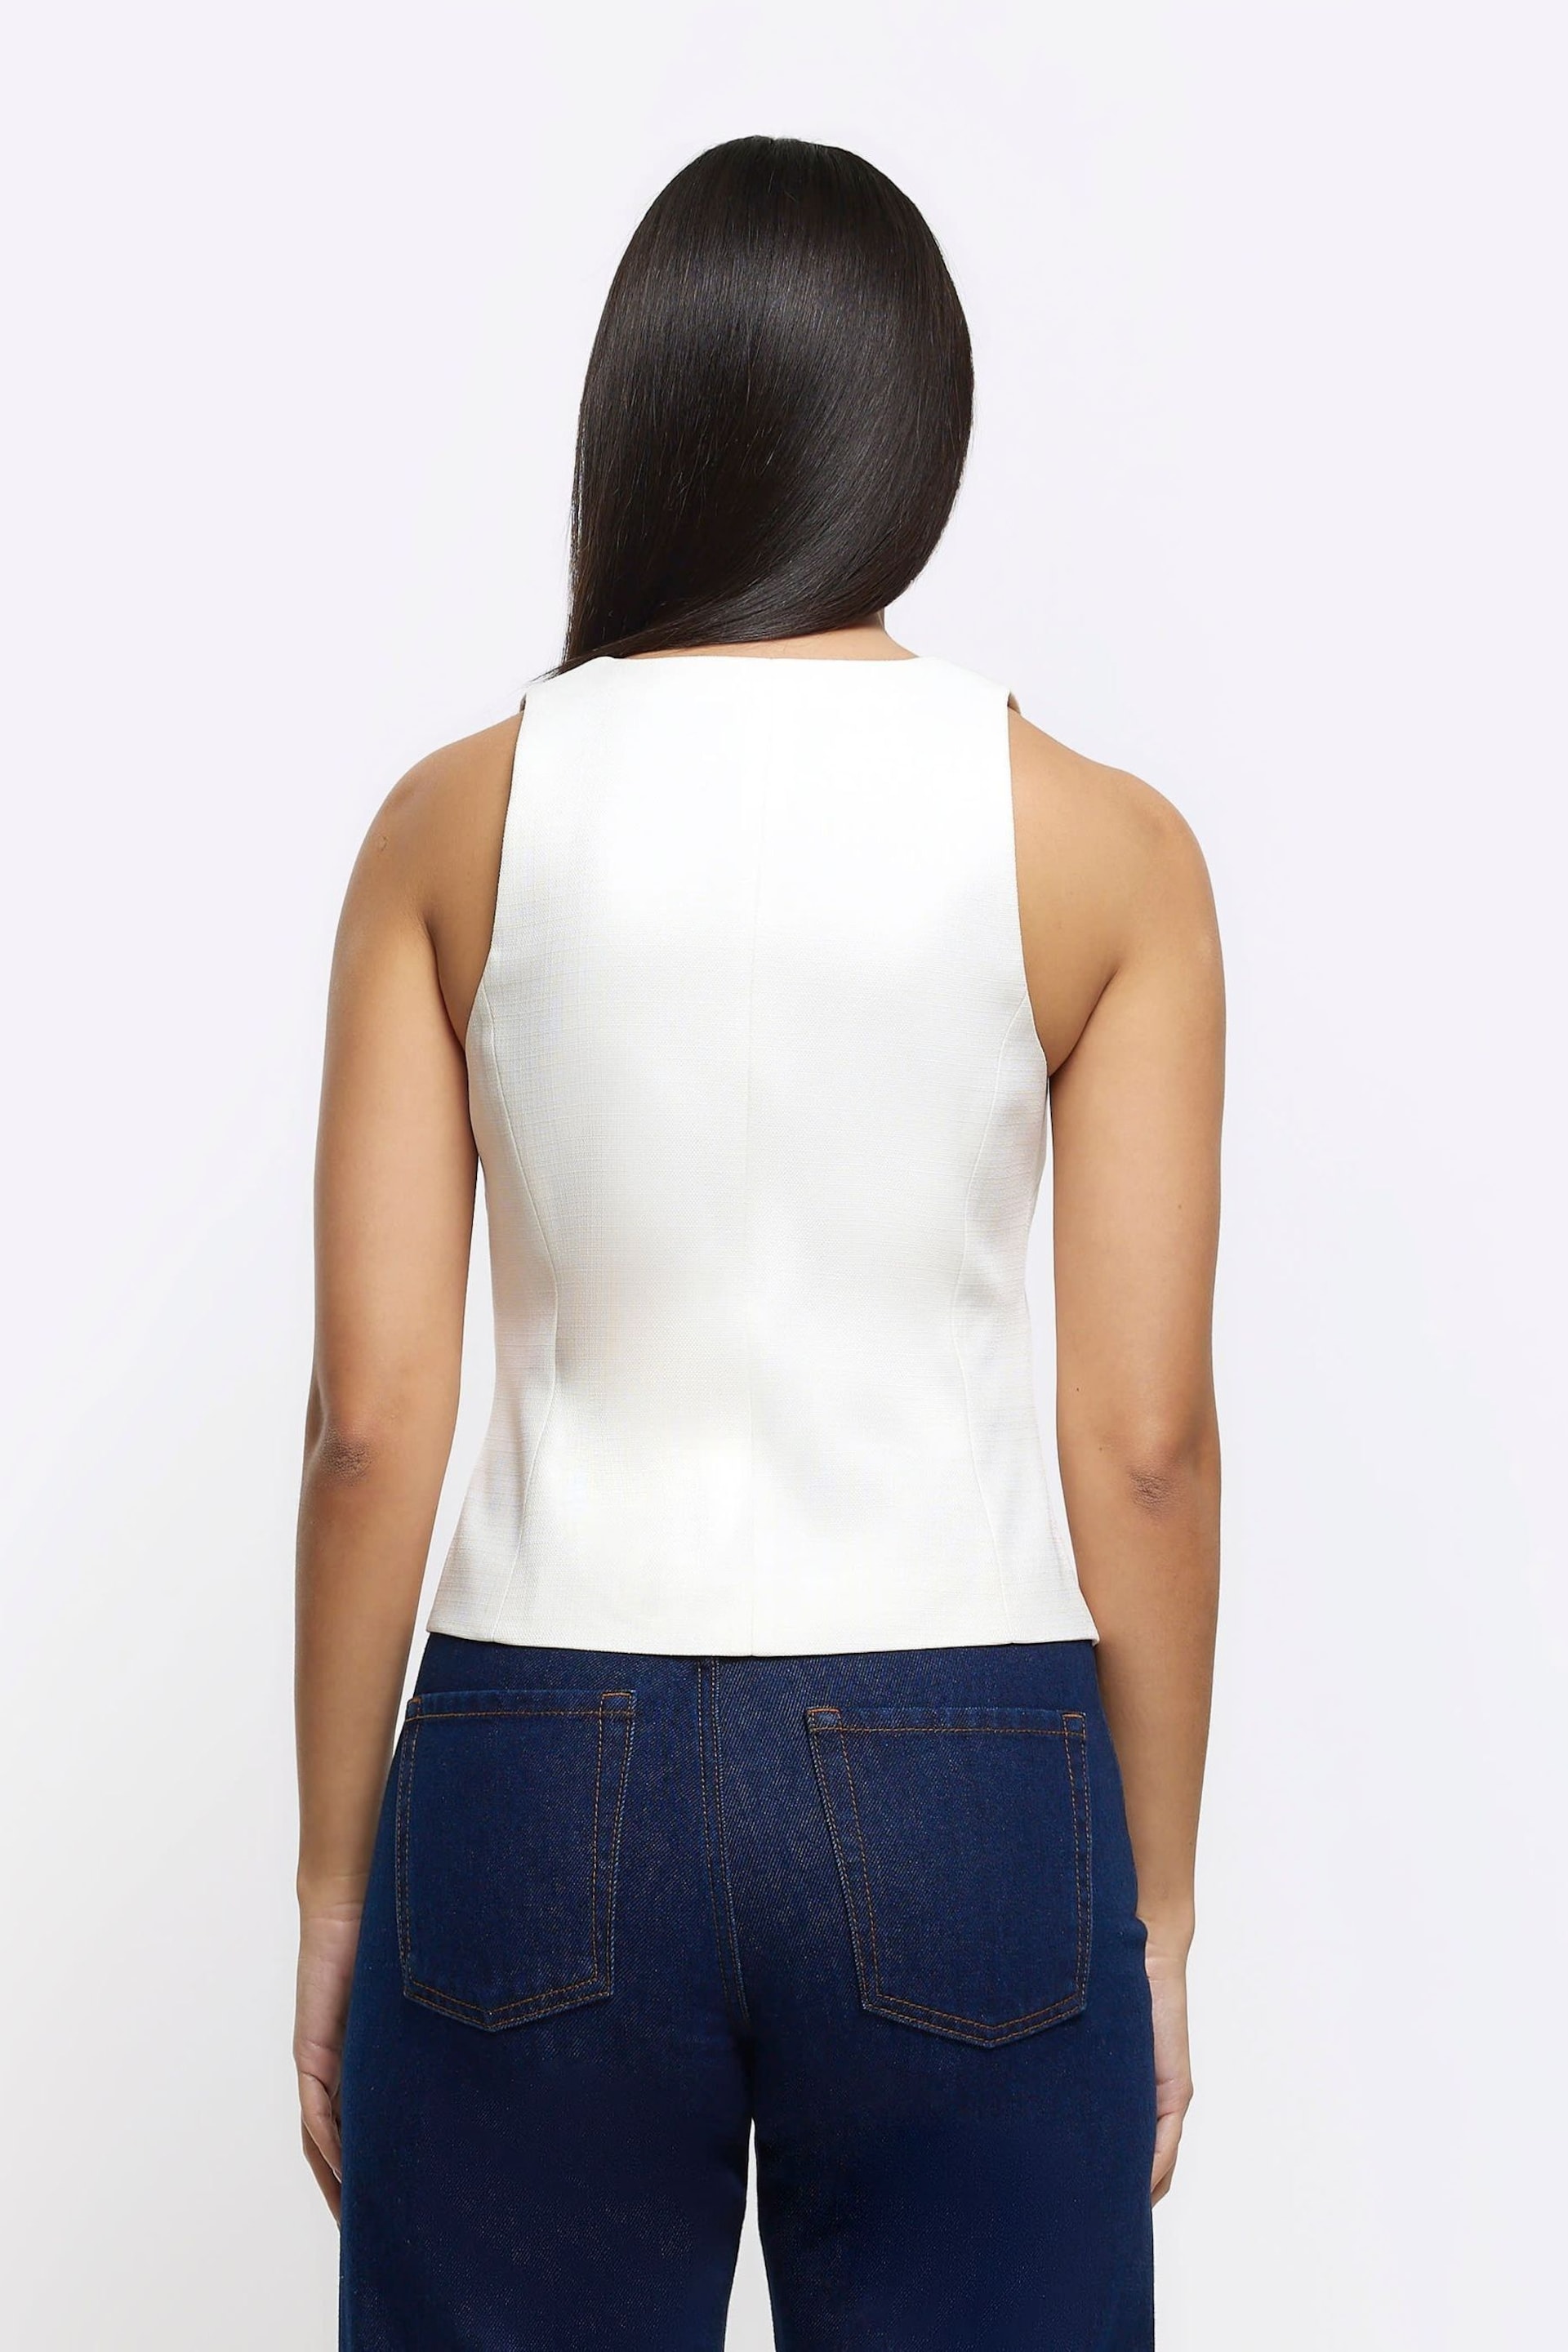 River Island Cream Button Front Tailored Waistcoat - Image 2 of 6